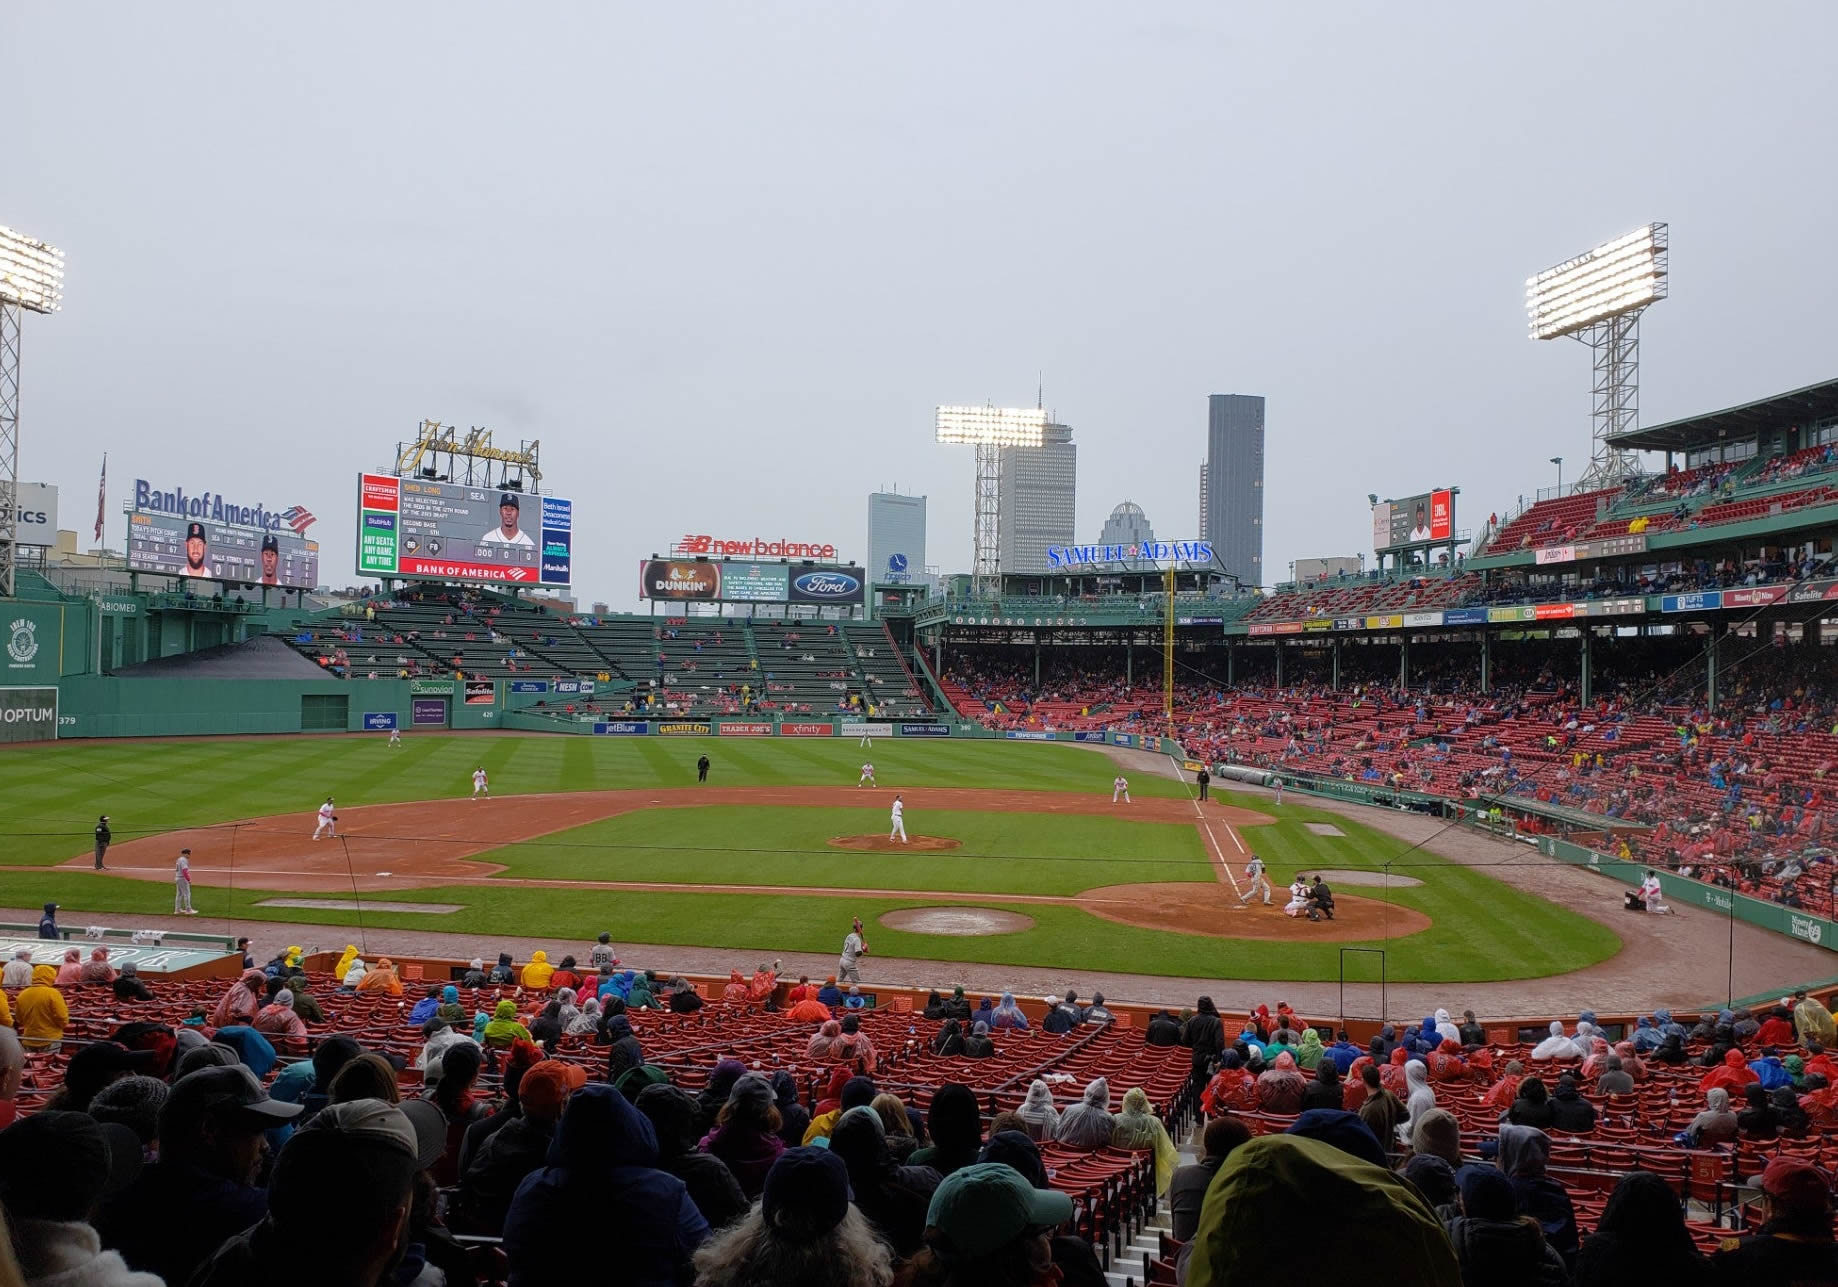 grandstand 24, row 1 seat view  for baseball - fenway park